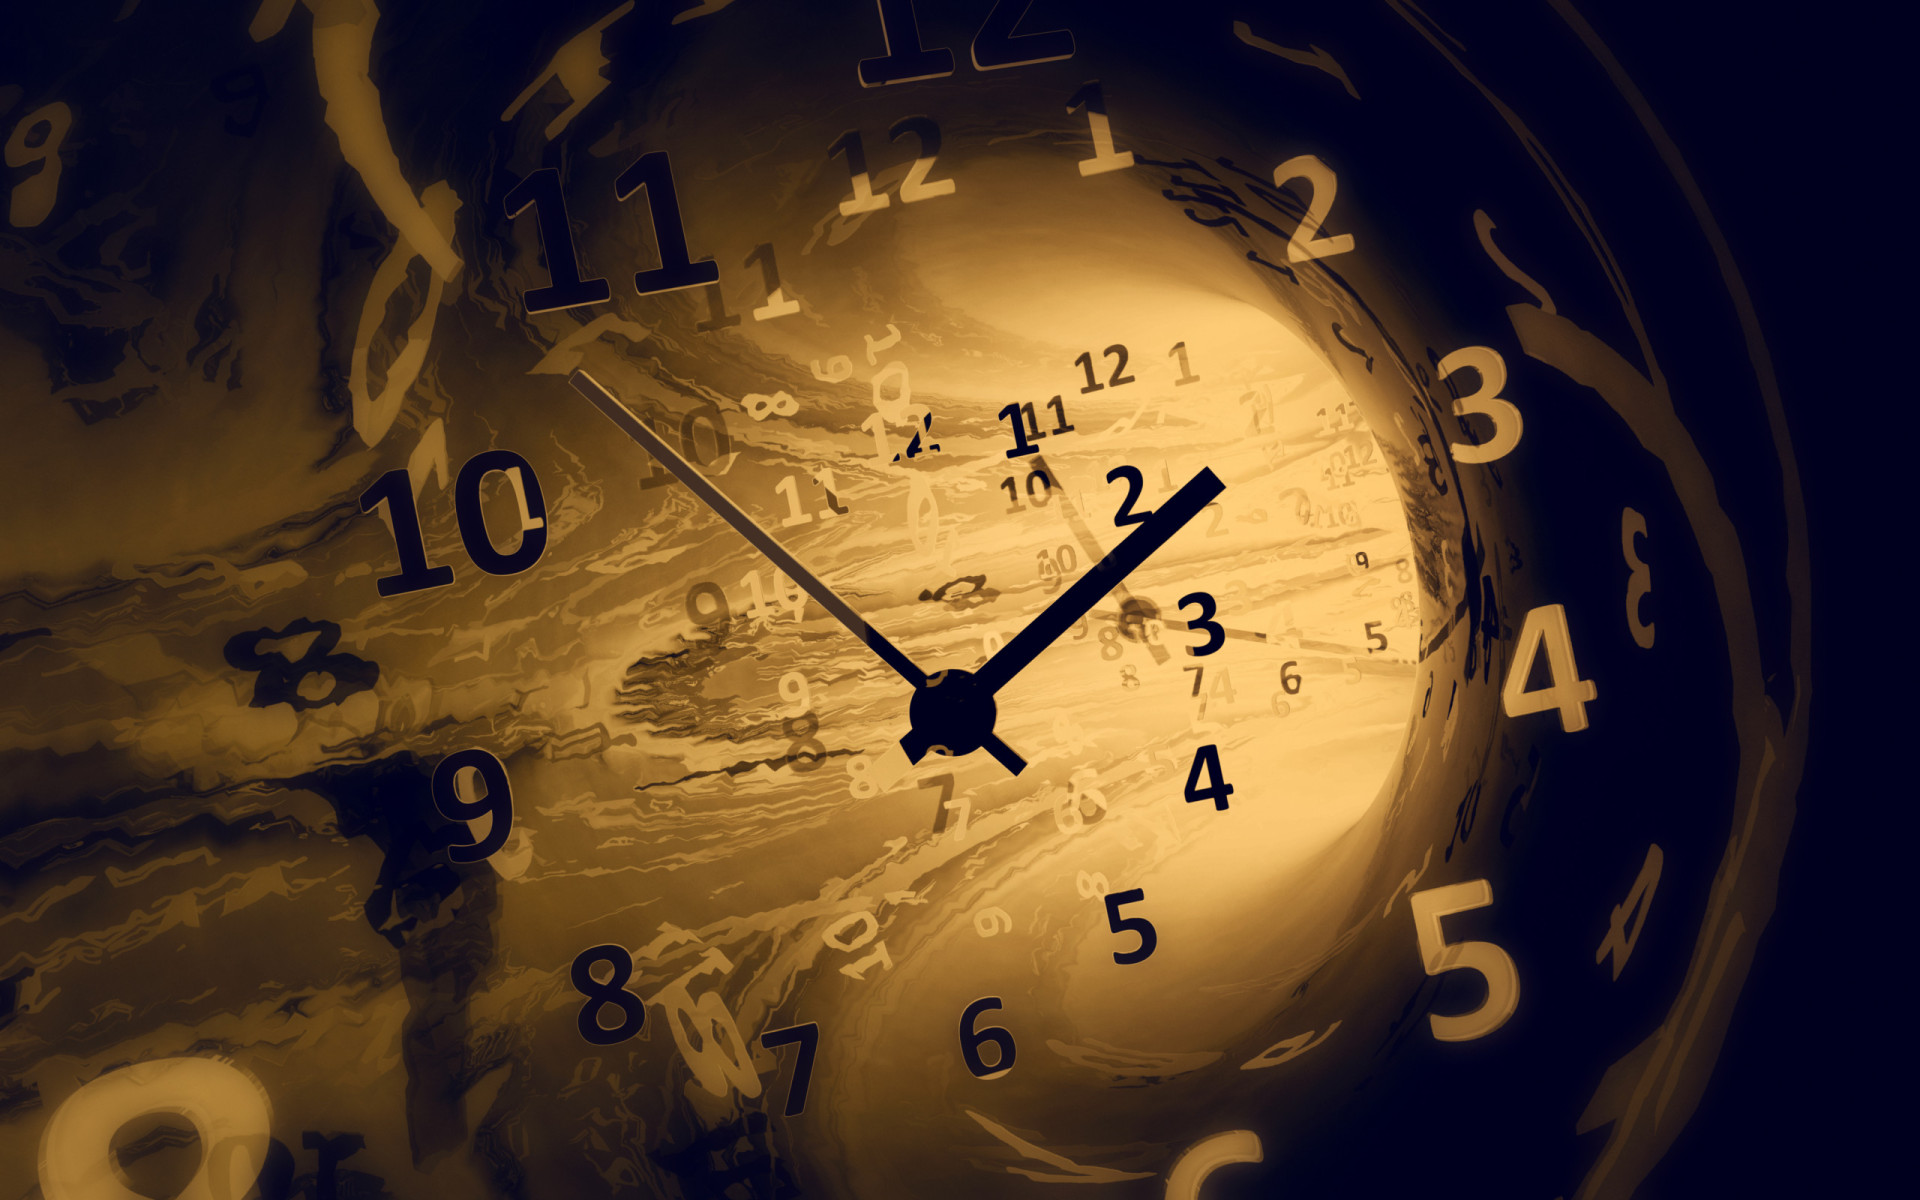 <p>The clocks in the sky click faster than the clocks on Earth. Because of this, the ones in the sky must be constantly readjusted to ensure accuracy. If not, your map app could be inaccurate by about six miles (10 km) per day!</p><p>You may also like:<a href="https://www.starsinsider.com/n/275276?utm_source=msn.com&utm_medium=display&utm_campaign=referral_description&utm_content=621991en-en"> The most epic celebrity feuds of all time</a></p>